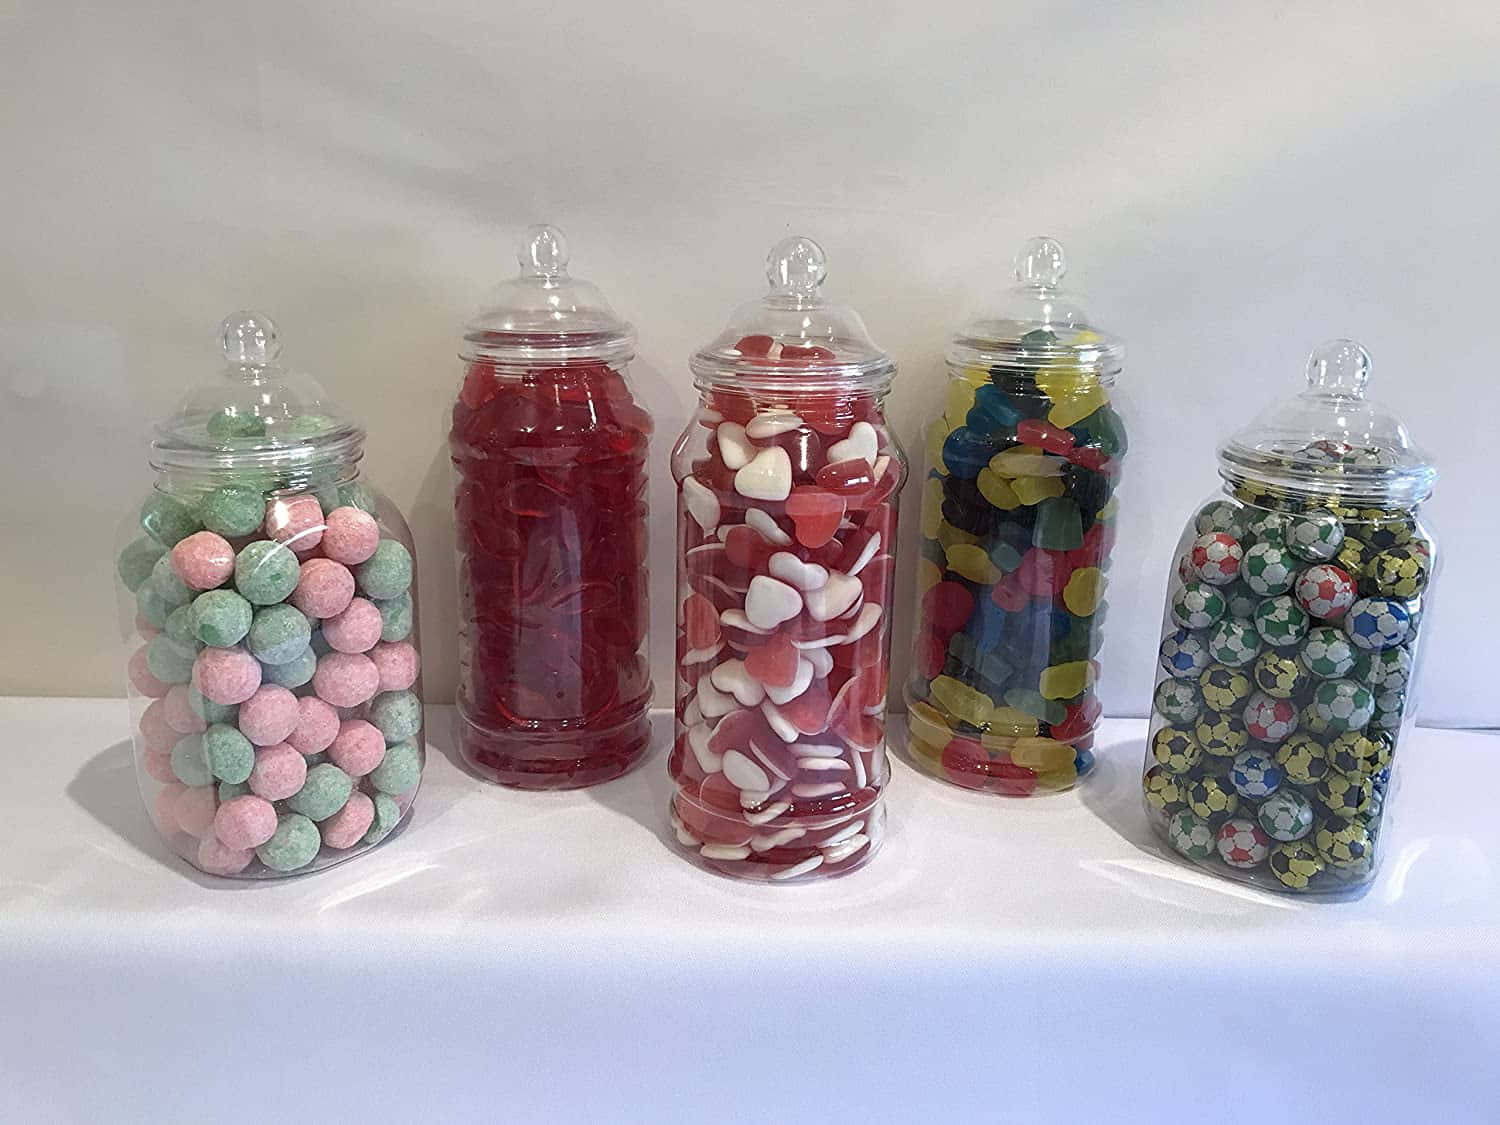 A Group Of Candy Jars With Candy Inside